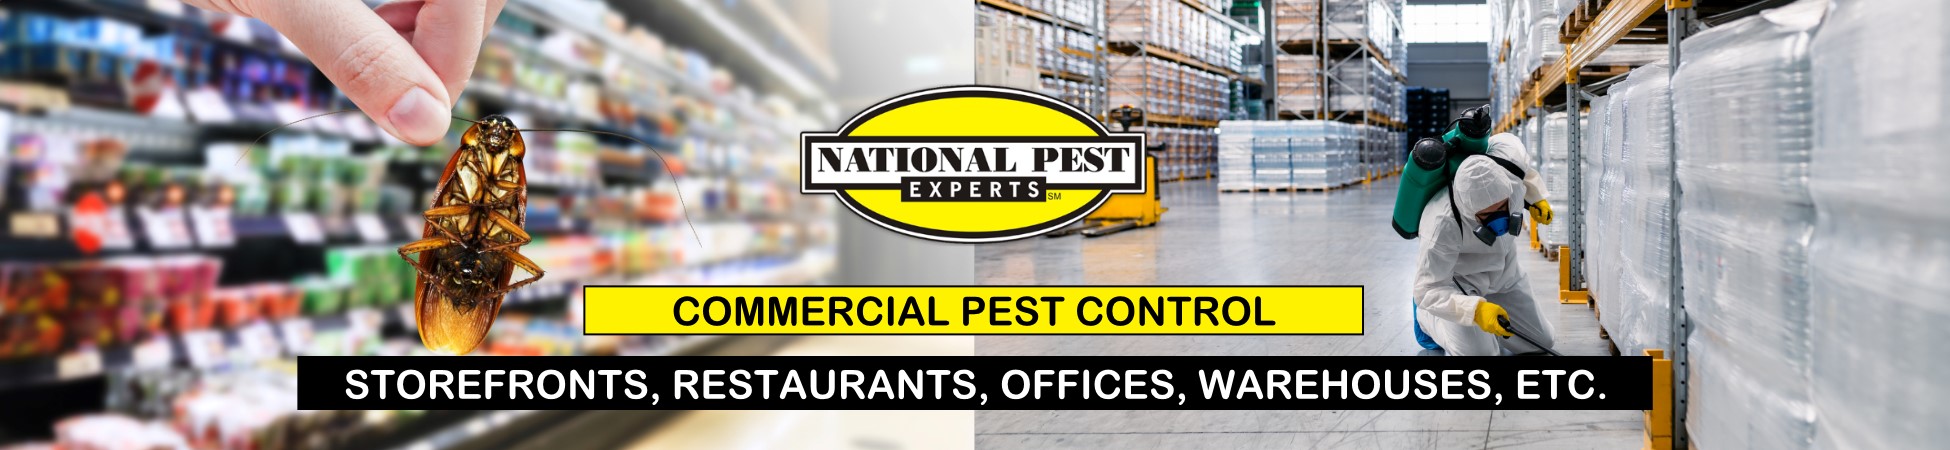 National Pest Experts - Commercial & Industrial exterminating and pest control in East Norwich, NY